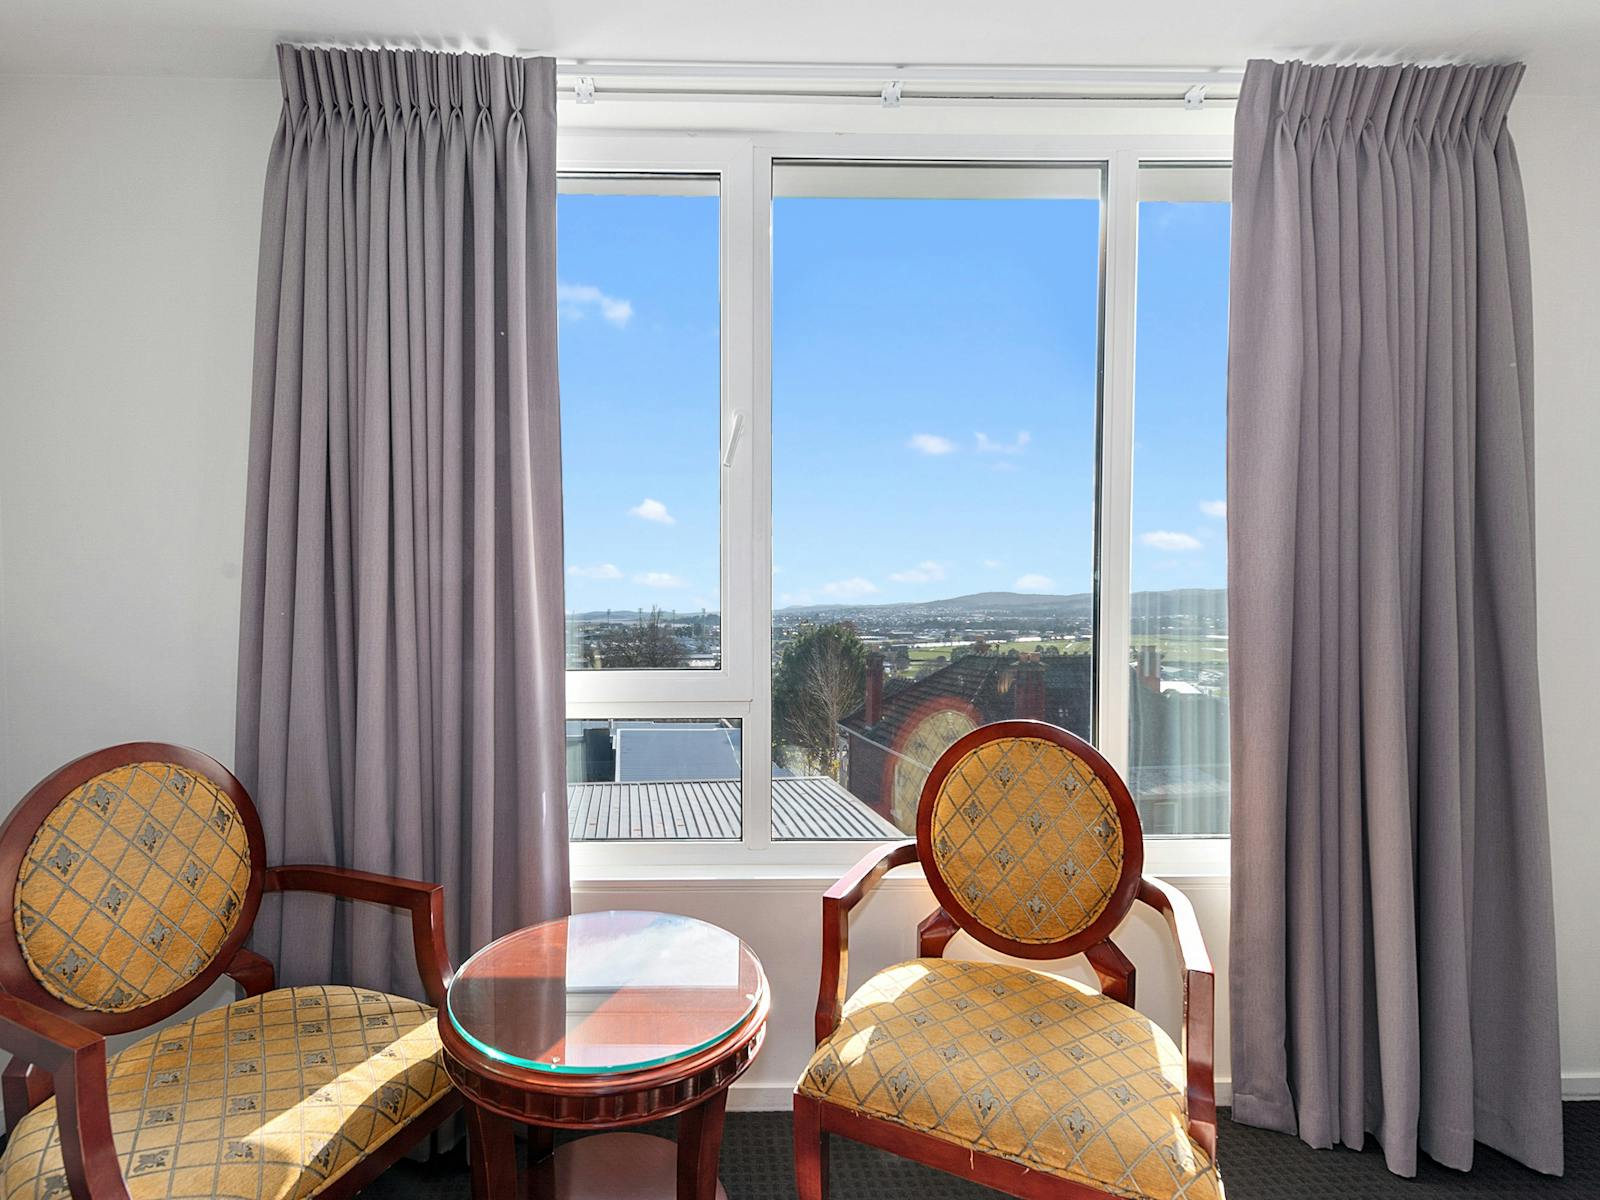 Each guest room is offering a view overlooking the city.